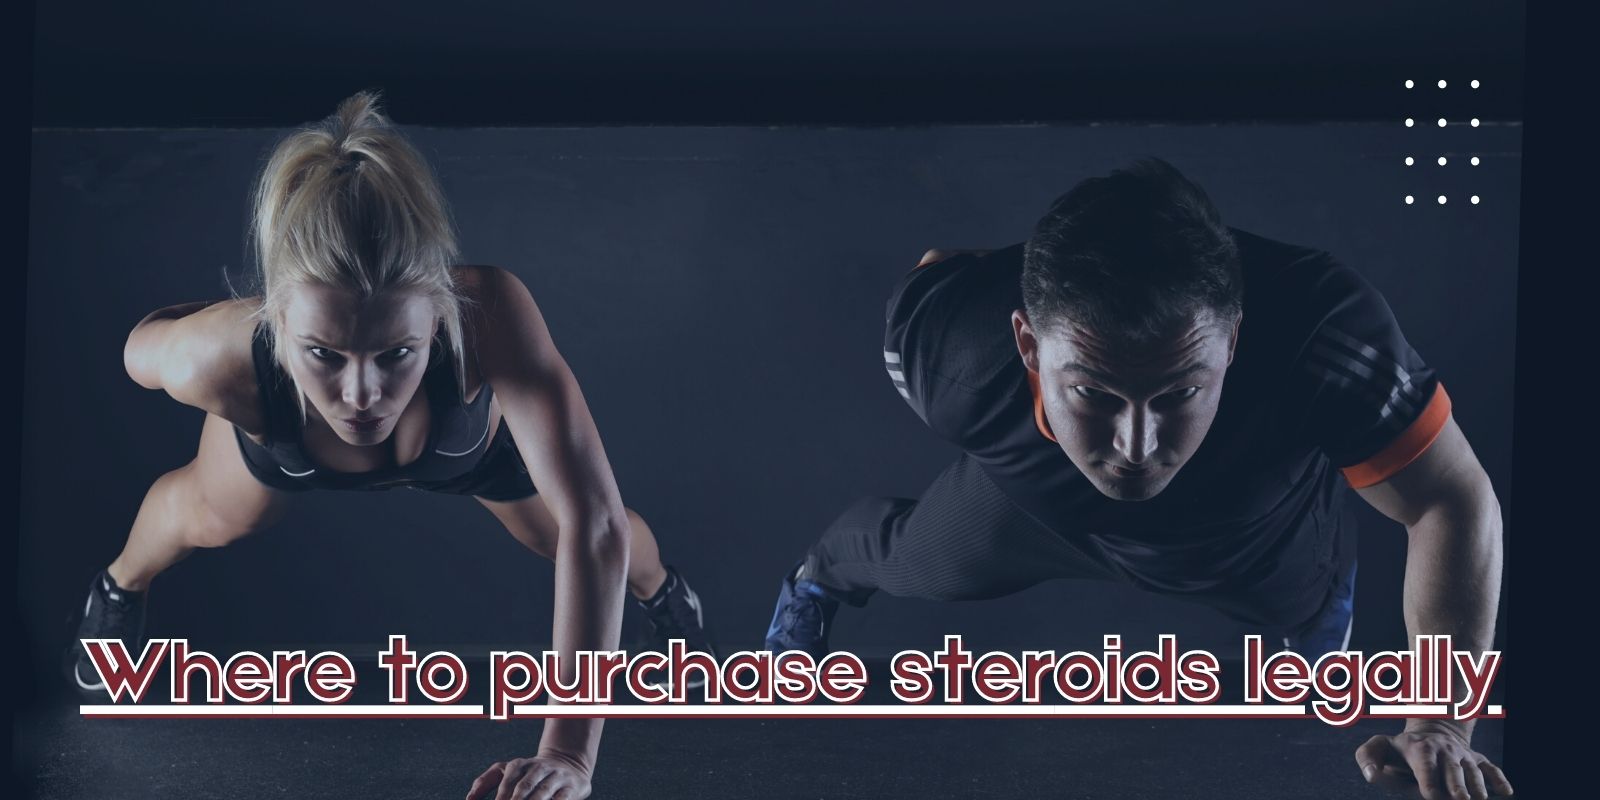 Where to purchase steroids legally